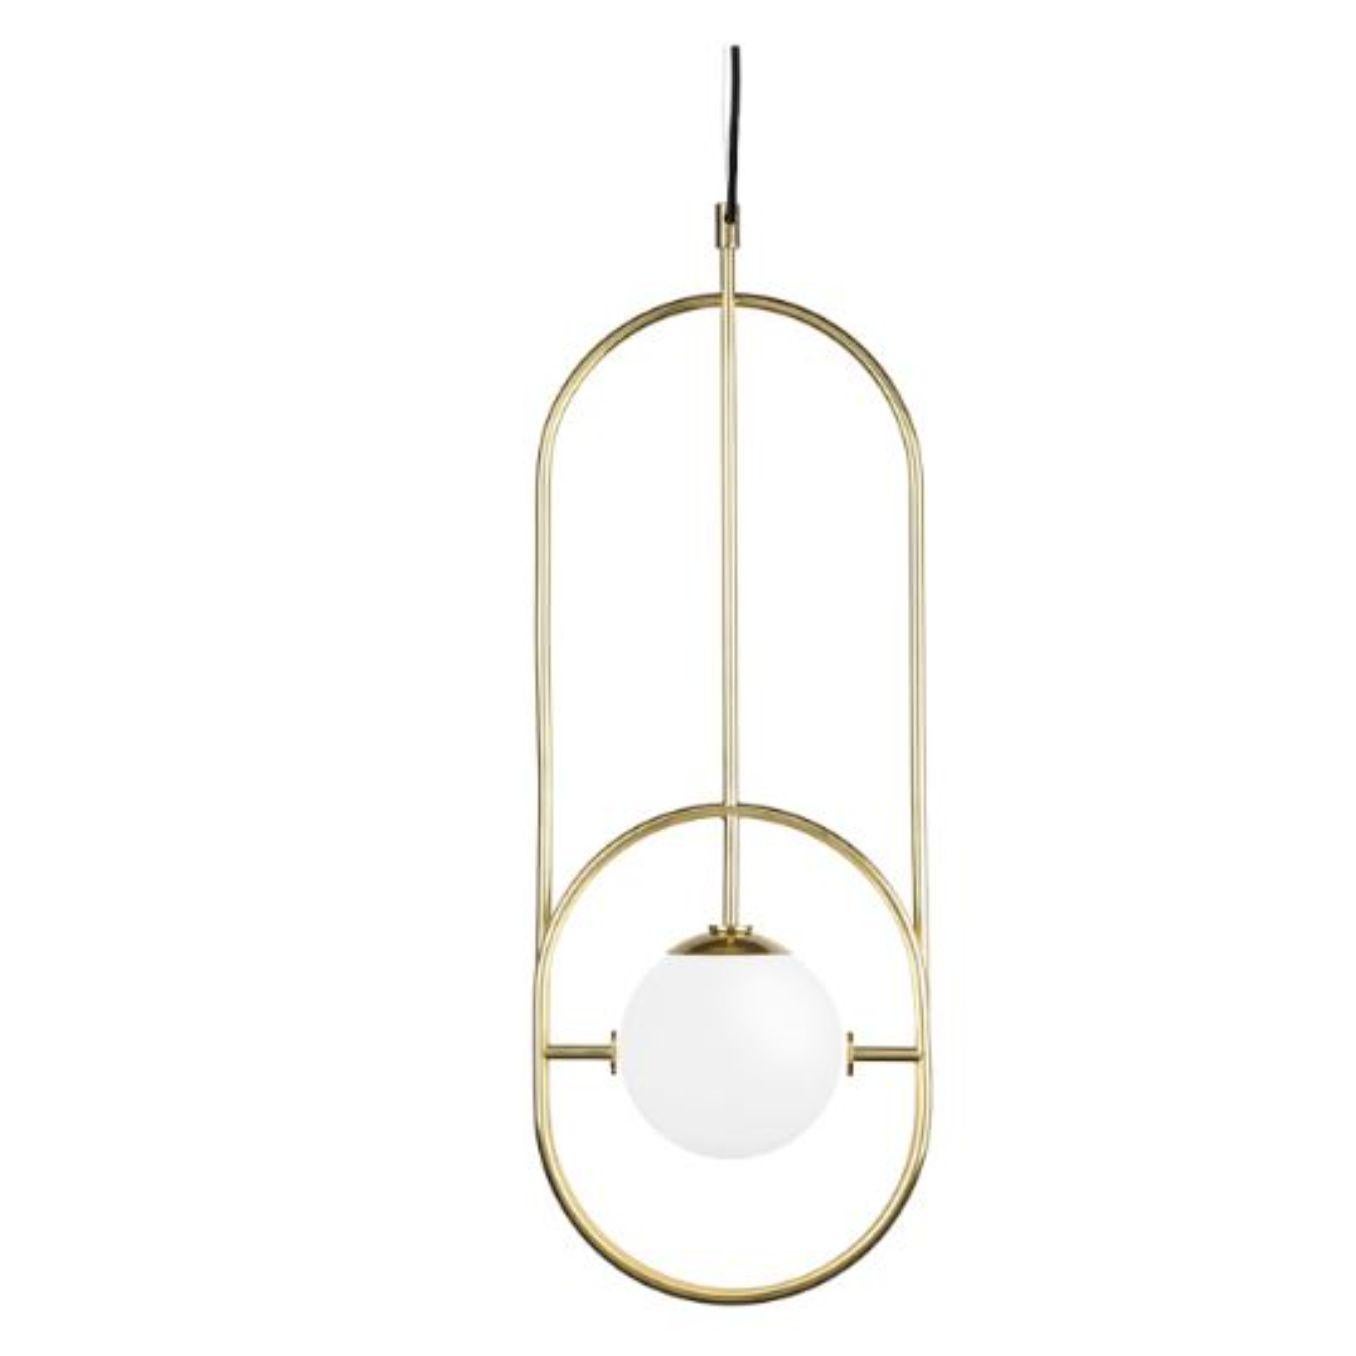 Copper loop I suspension lamp by Dooq
Dimensions: W 26.5 x D 15 x H 73 cm
Materials: lacquered metal, polished or brushed metal, copper. 
Also available in different colours and materials.

Information:
230V/50Hz
1 x max. G9
4W